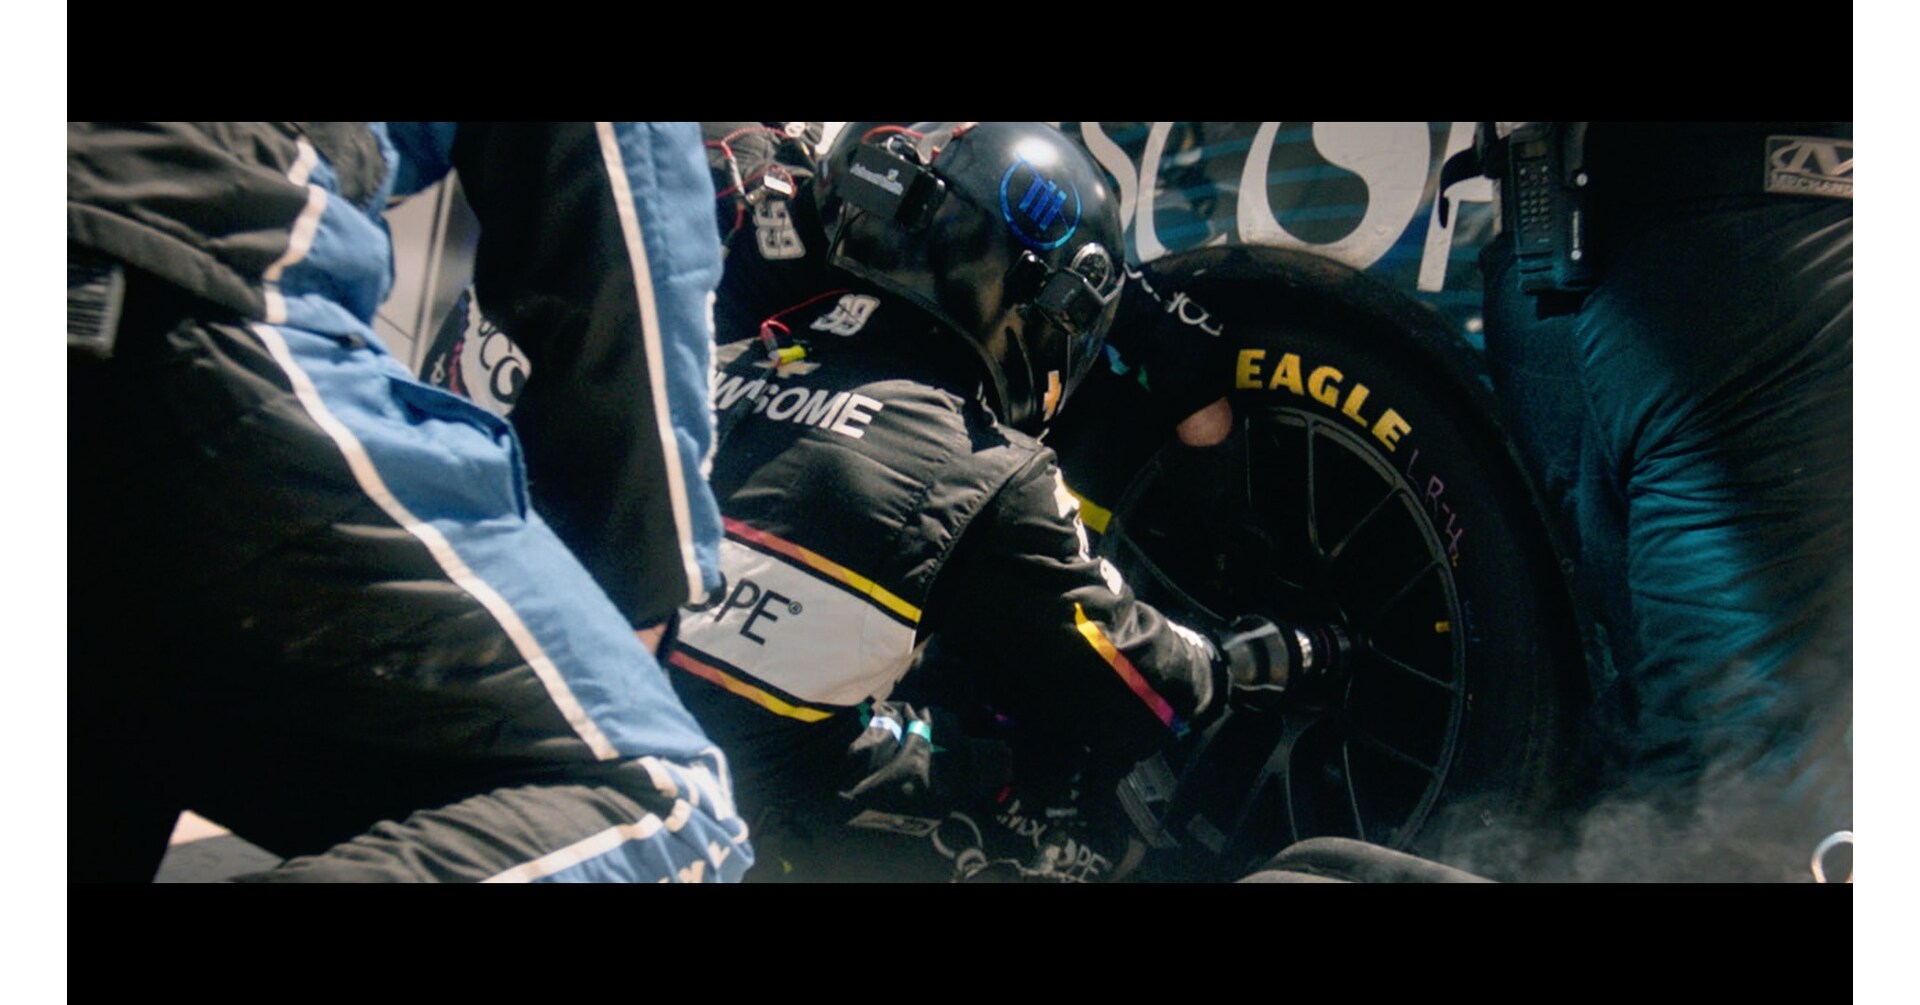  GOODYEAR AND NASCAR'S SHARED LEGACY OF PERFORMANCE, INNOVATION BROUGHT TO LIFE IN NEW TV AD 